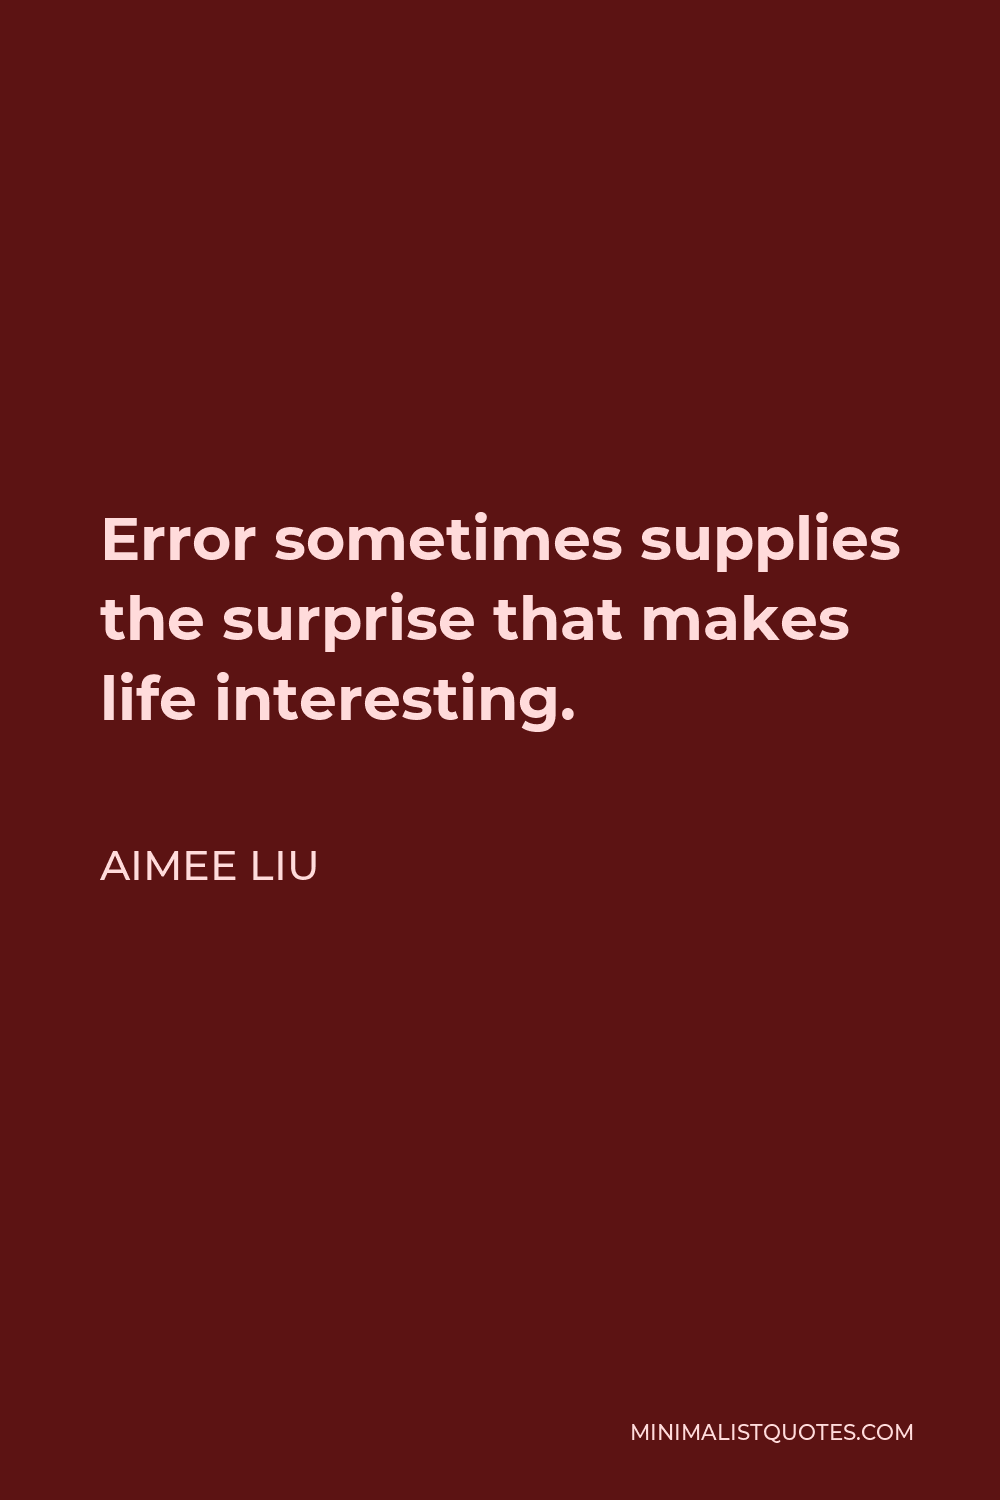 Aimee Liu Quote - Error sometimes supplies the surprise that makes life interesting.